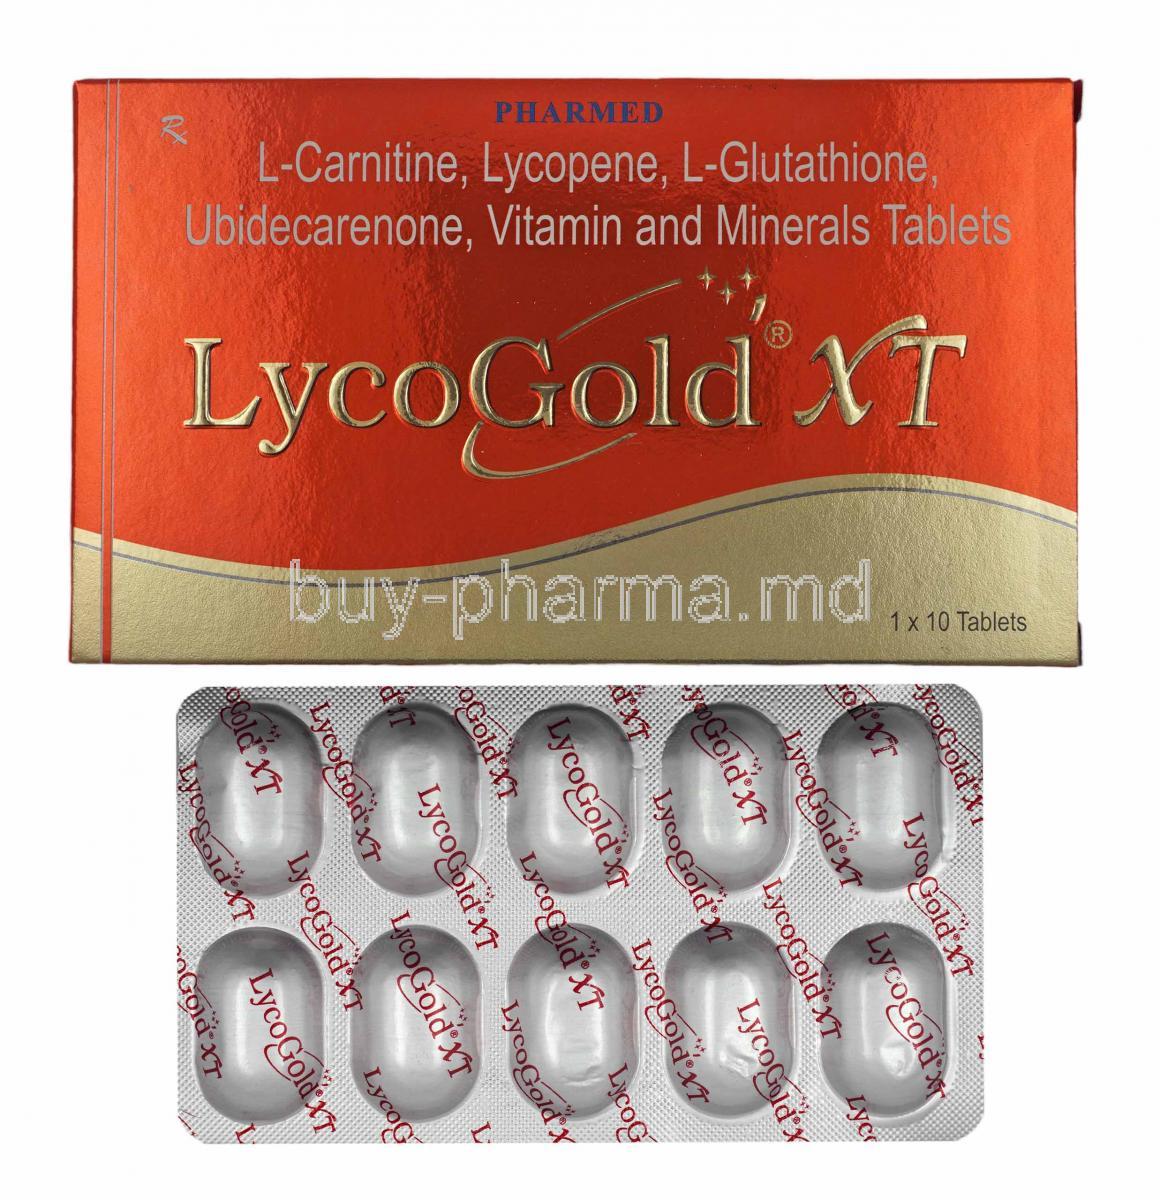 Lycogold XT box and tablets